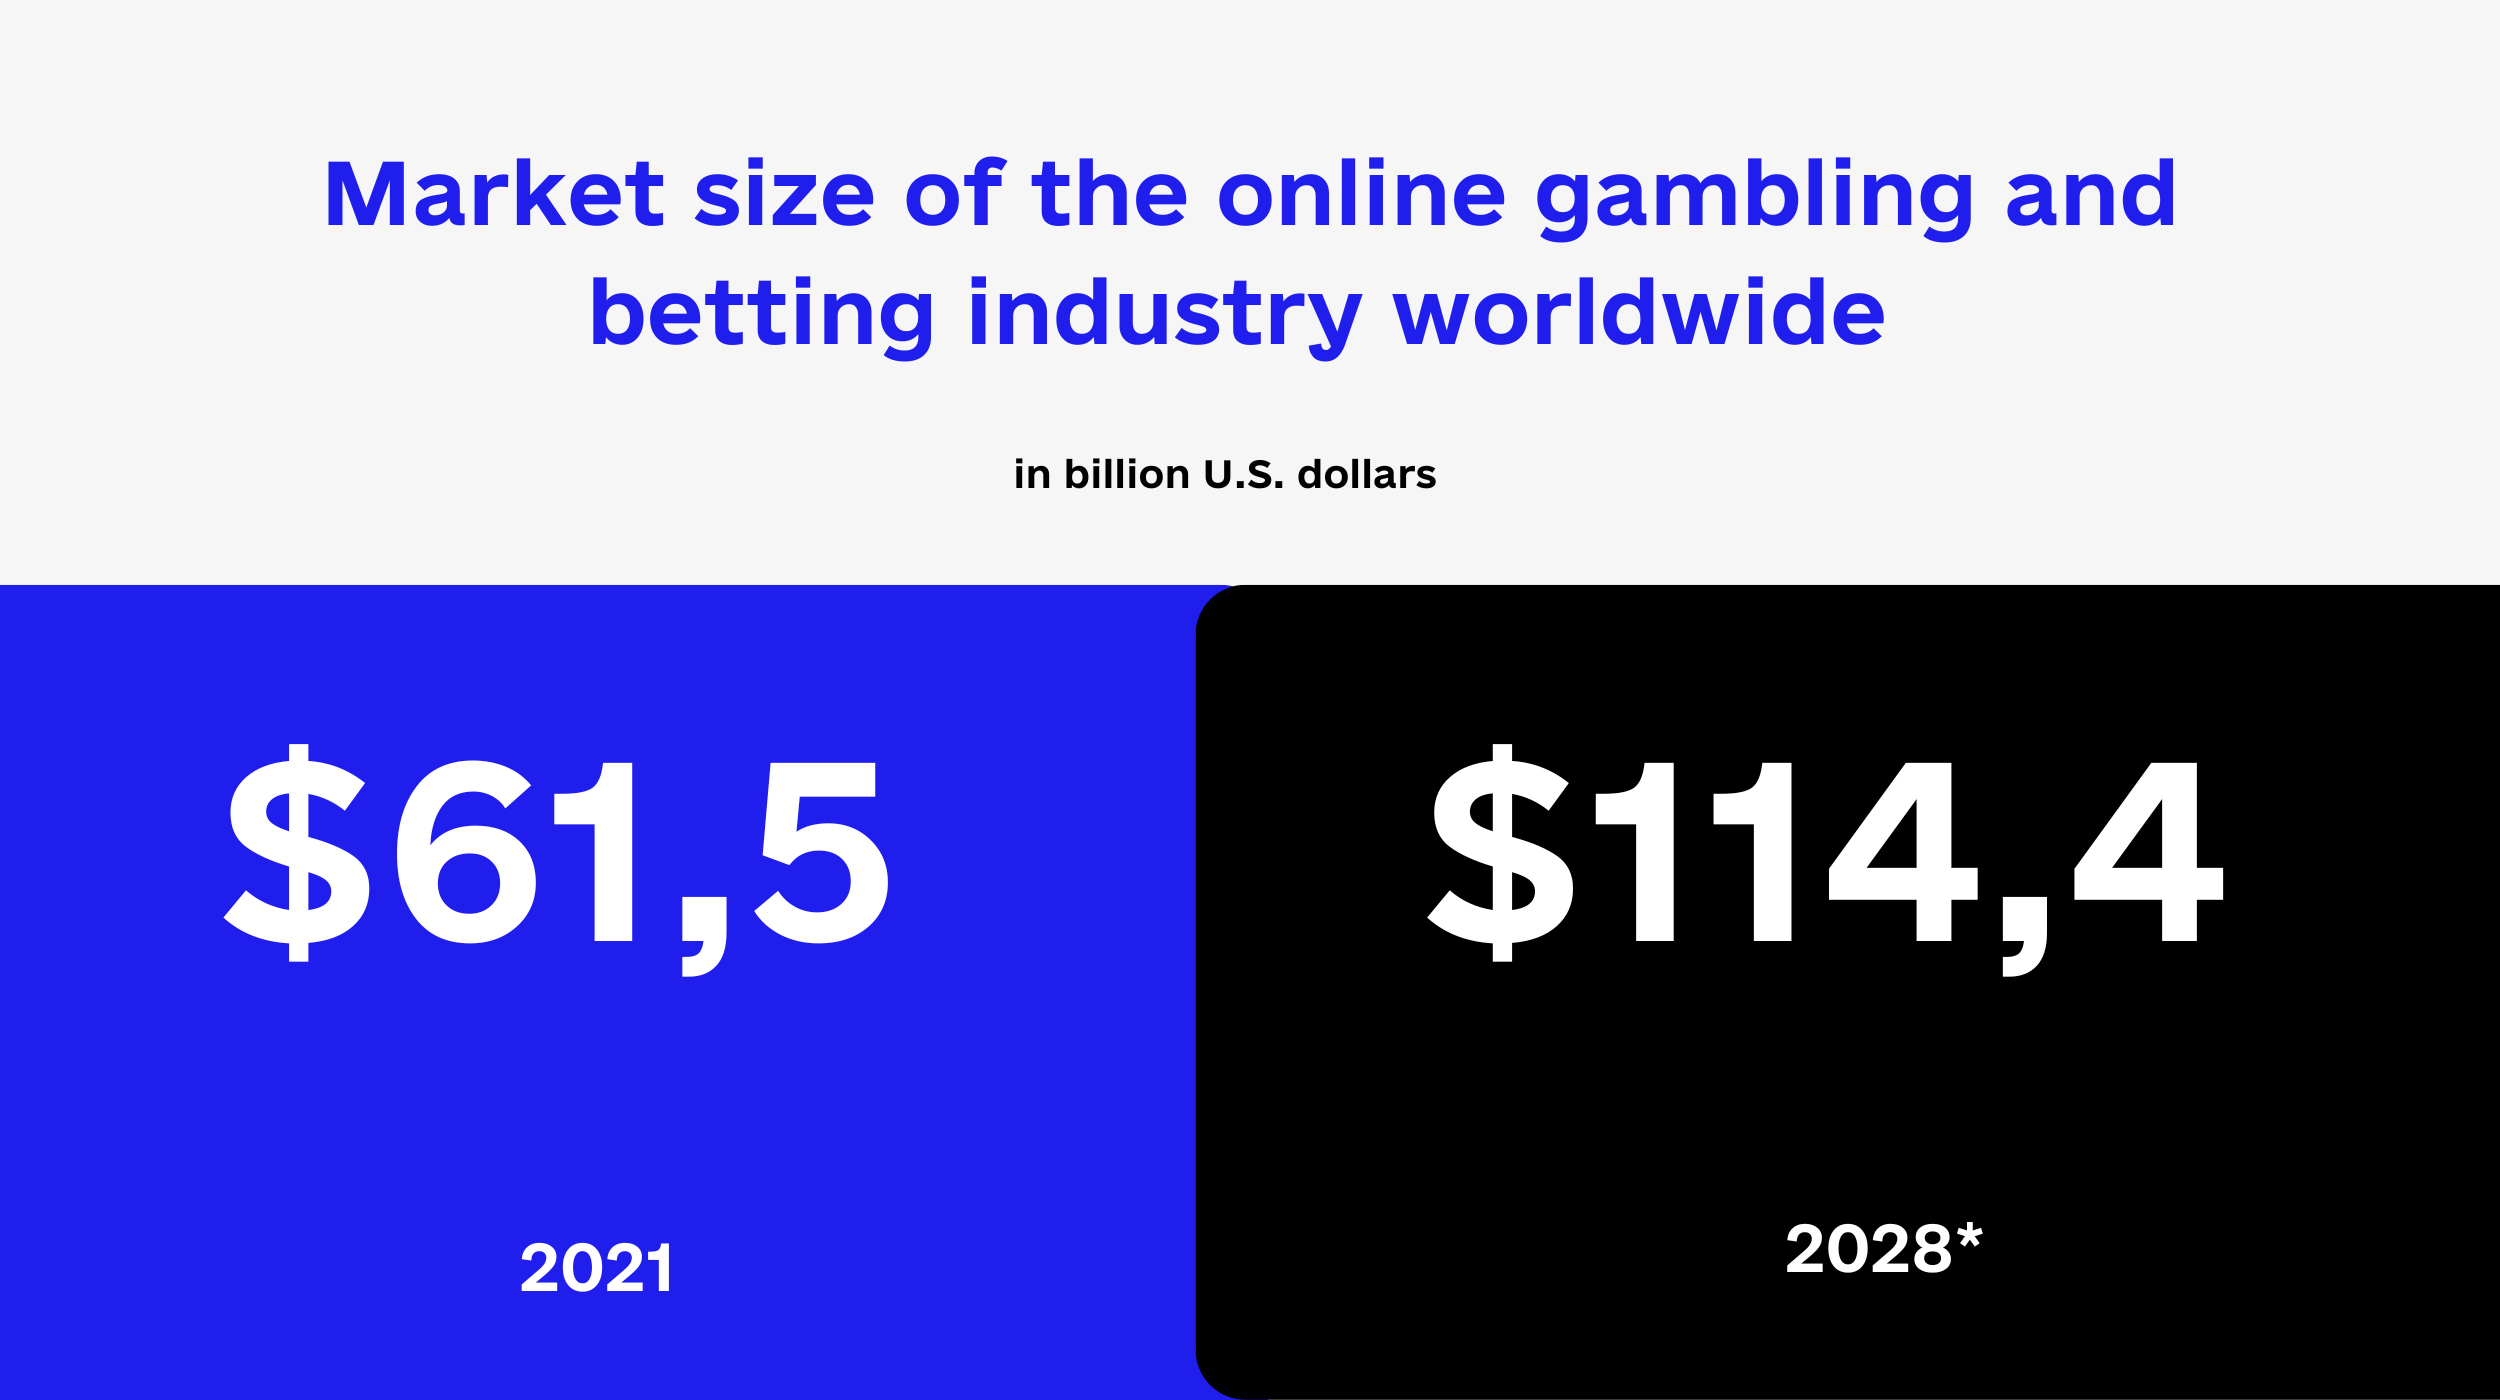 Market size of the online gambling and betting industry worldwide